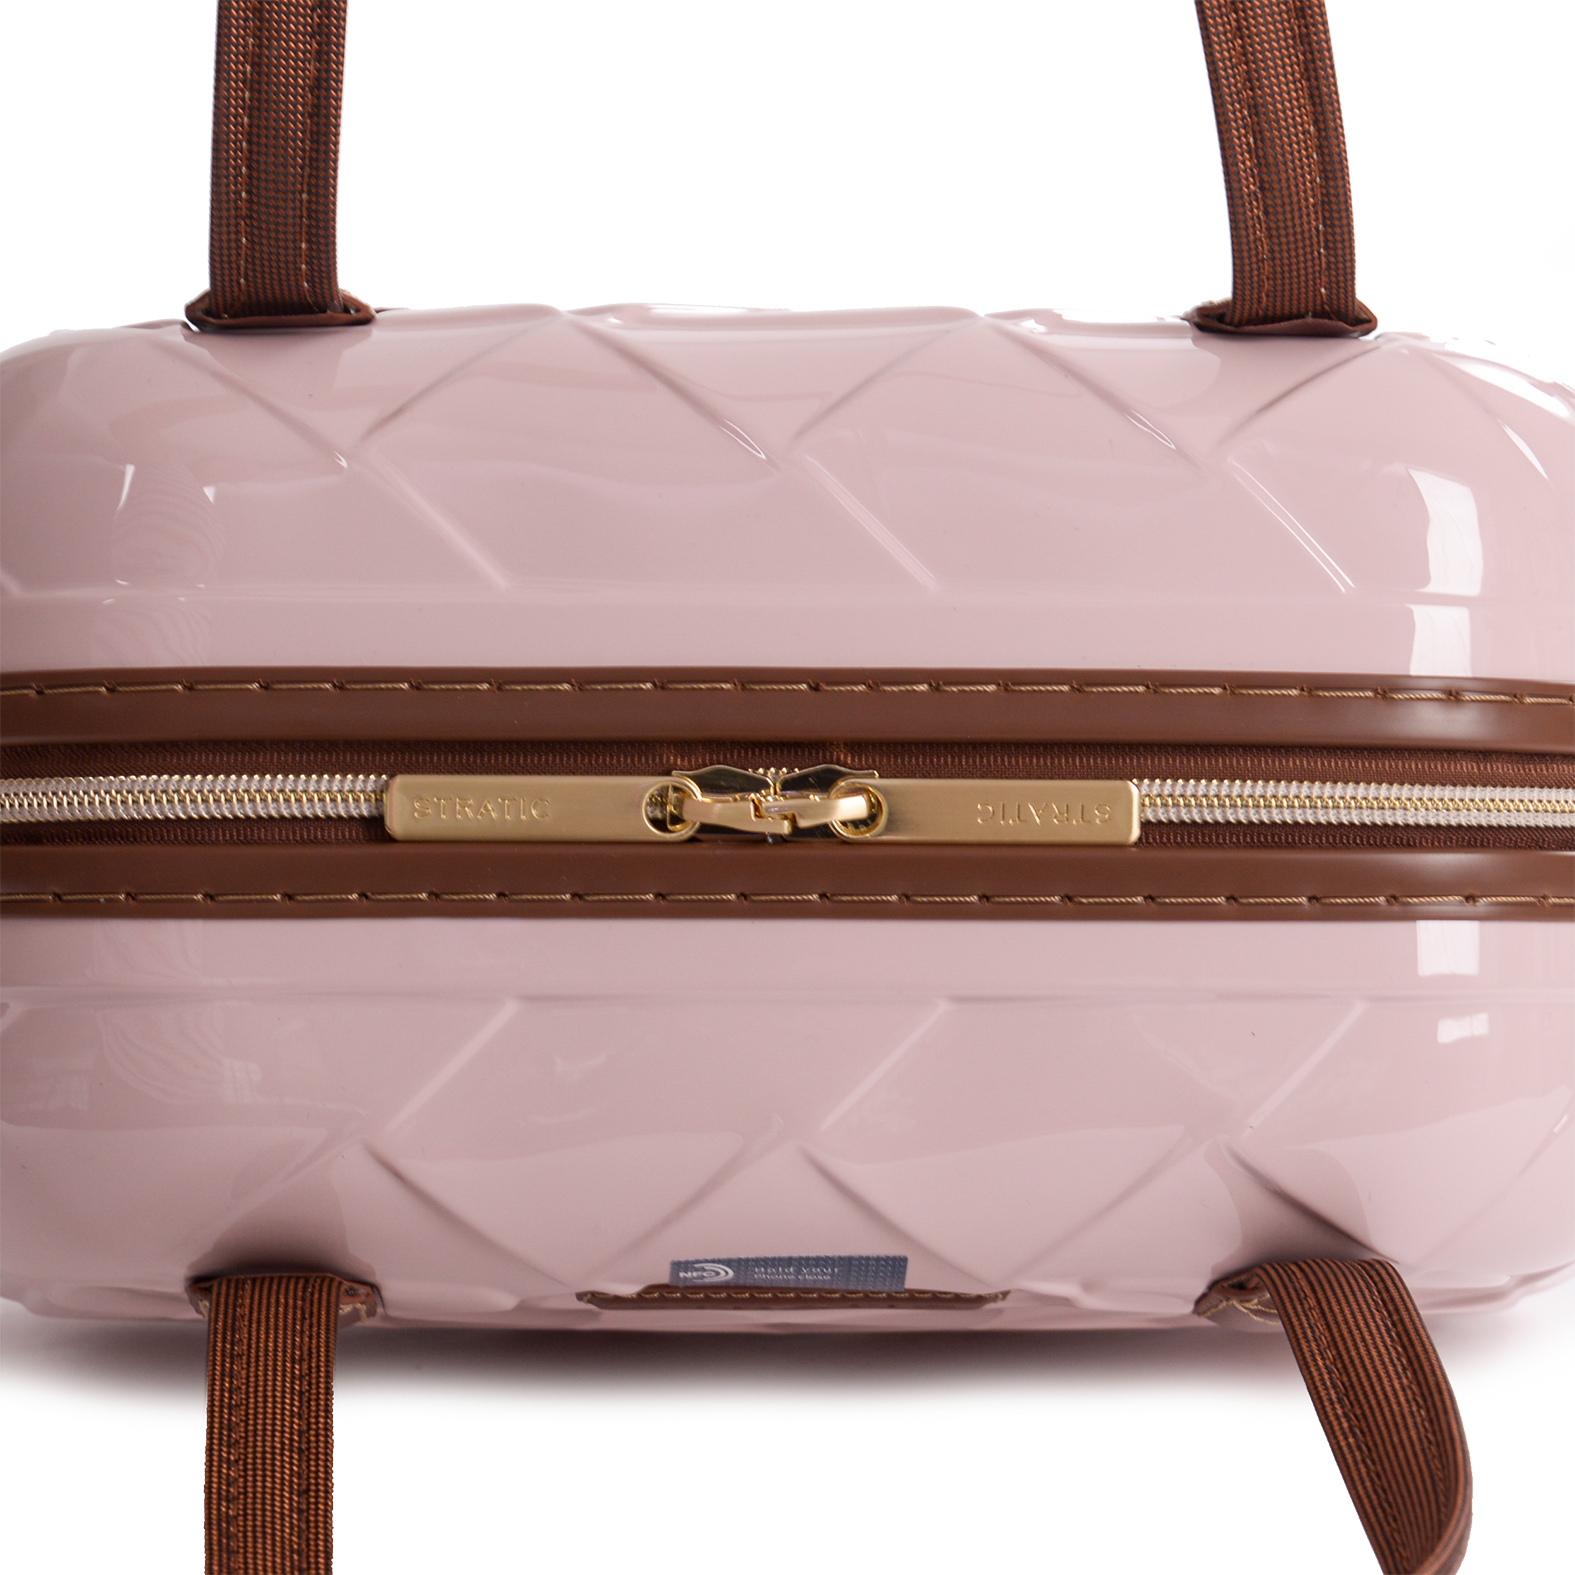 Stratic Leather and More Beautycase Rose